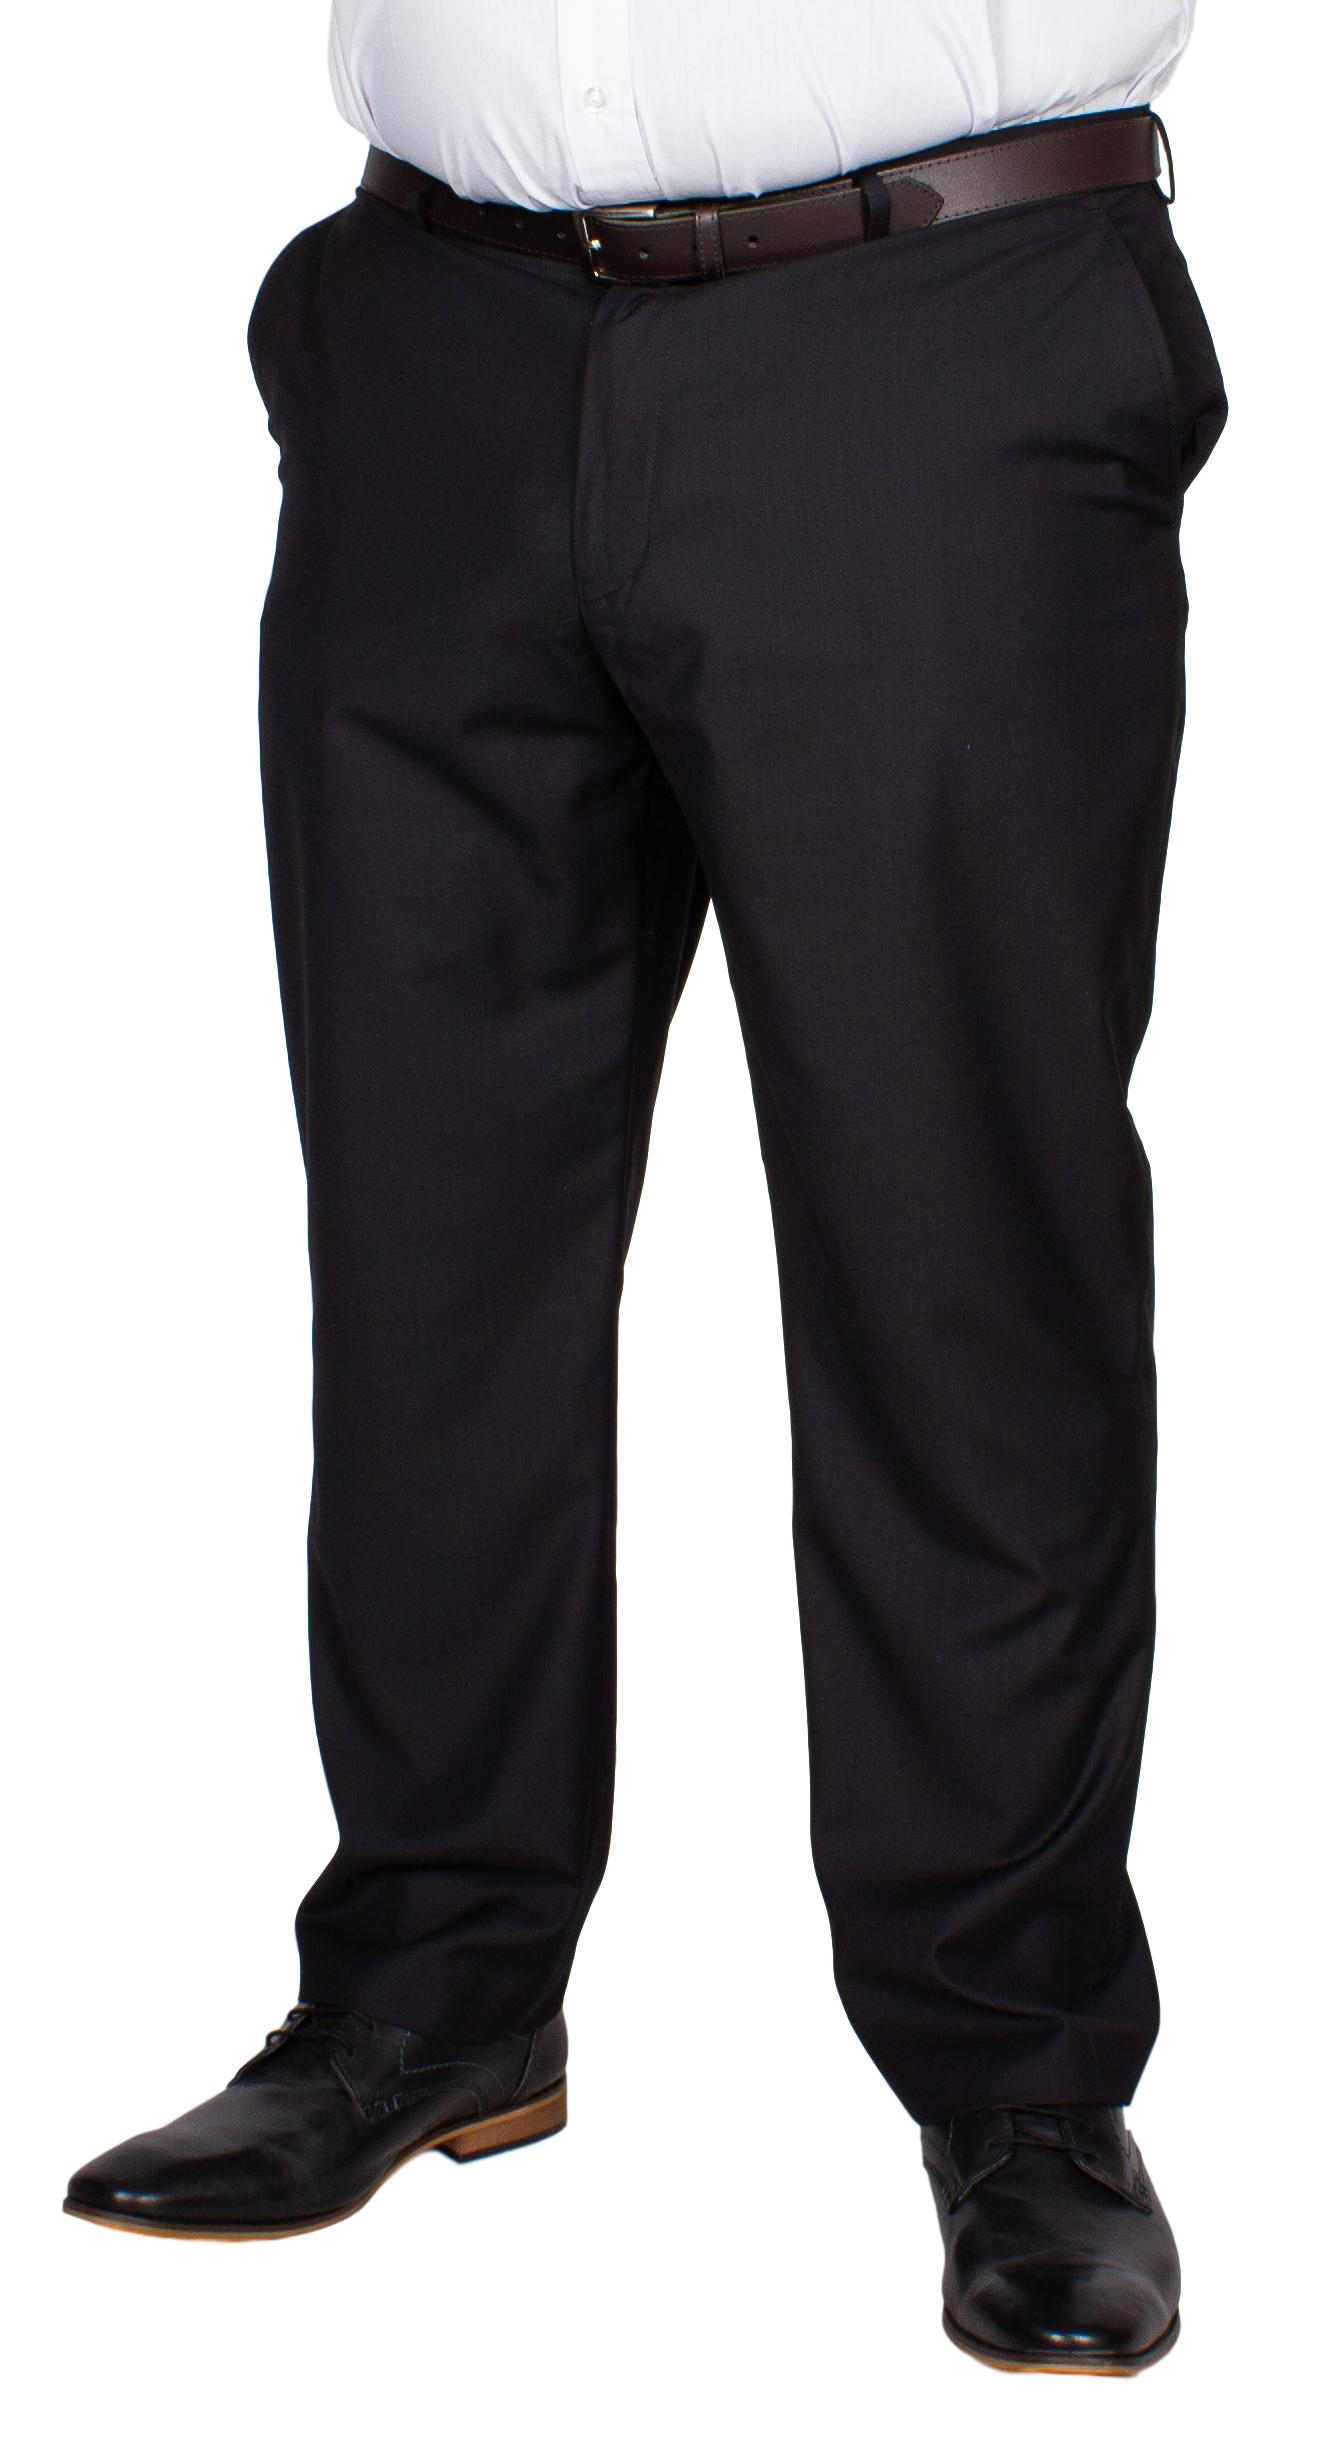 Men's Pleated Trousers with Self-Belt - Unhemmed |